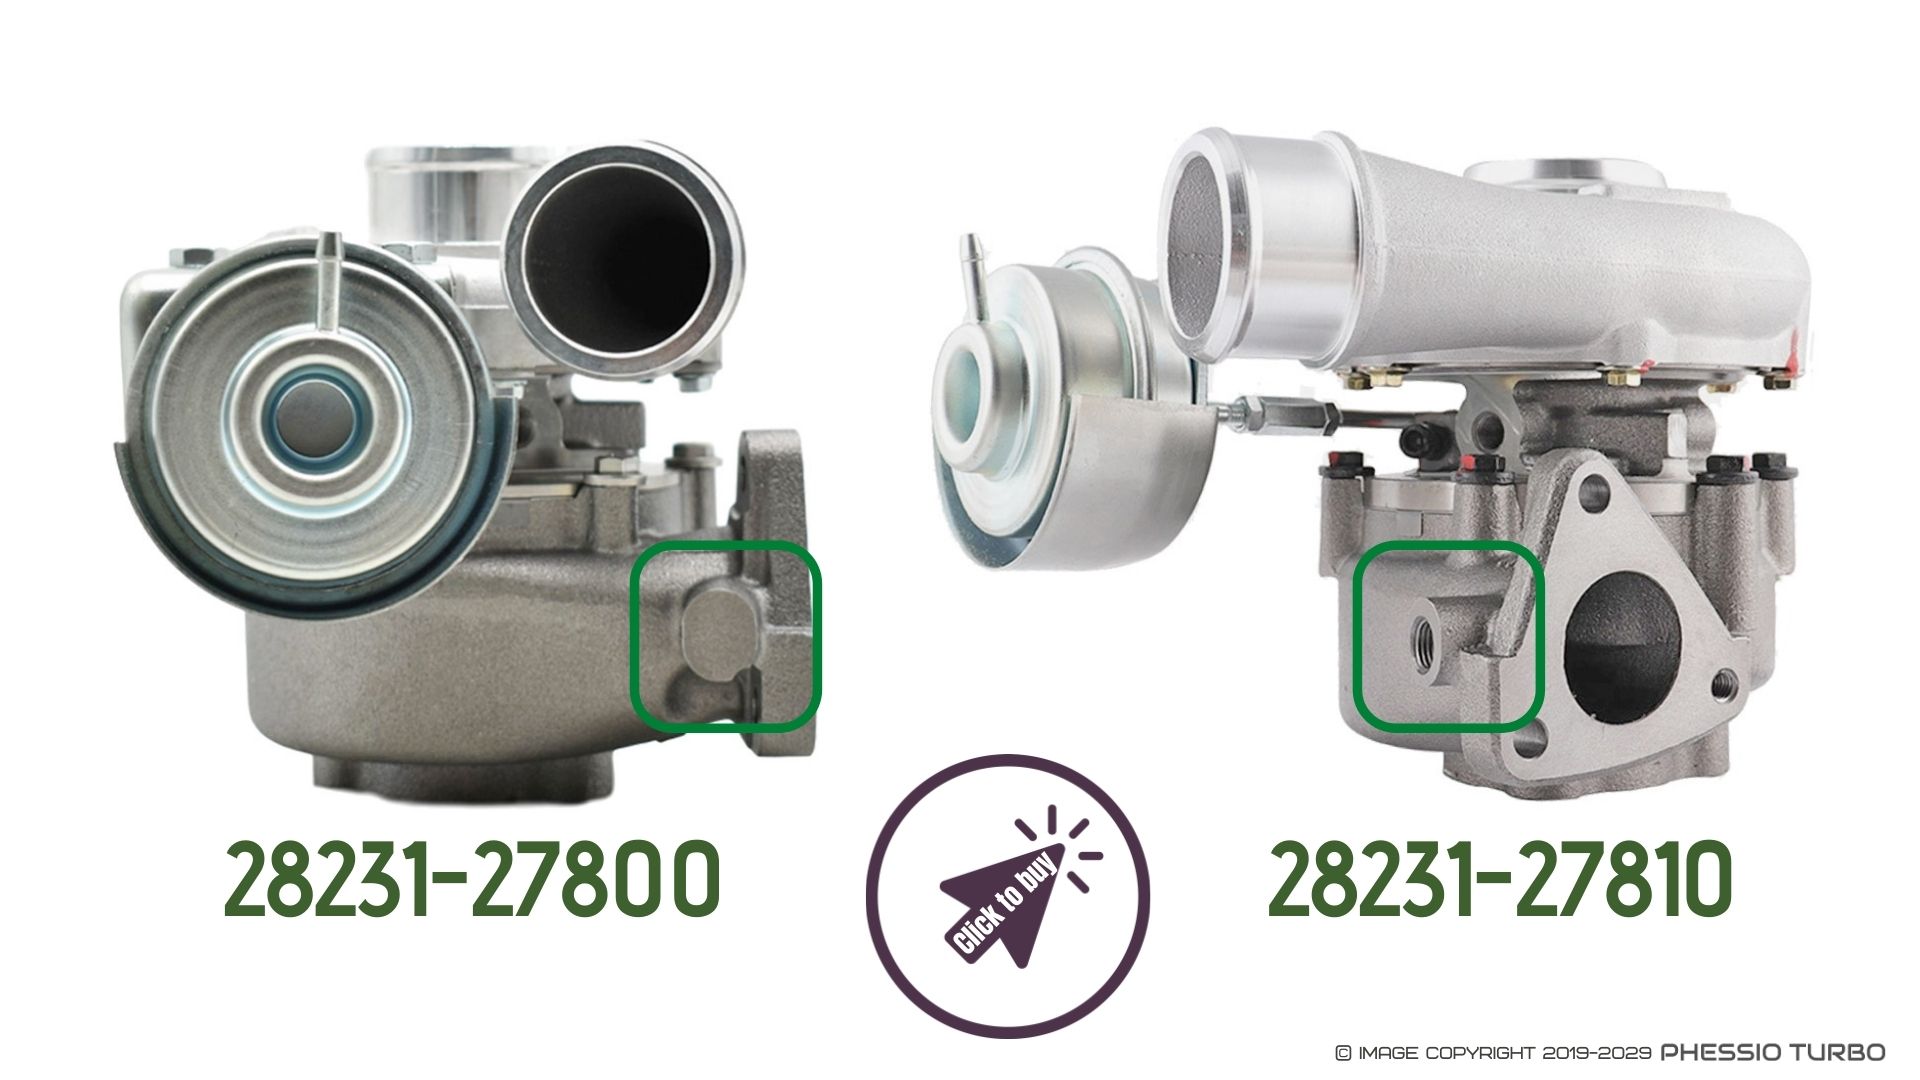 28231-27800 and 28231-27810 are not the same turbocharger